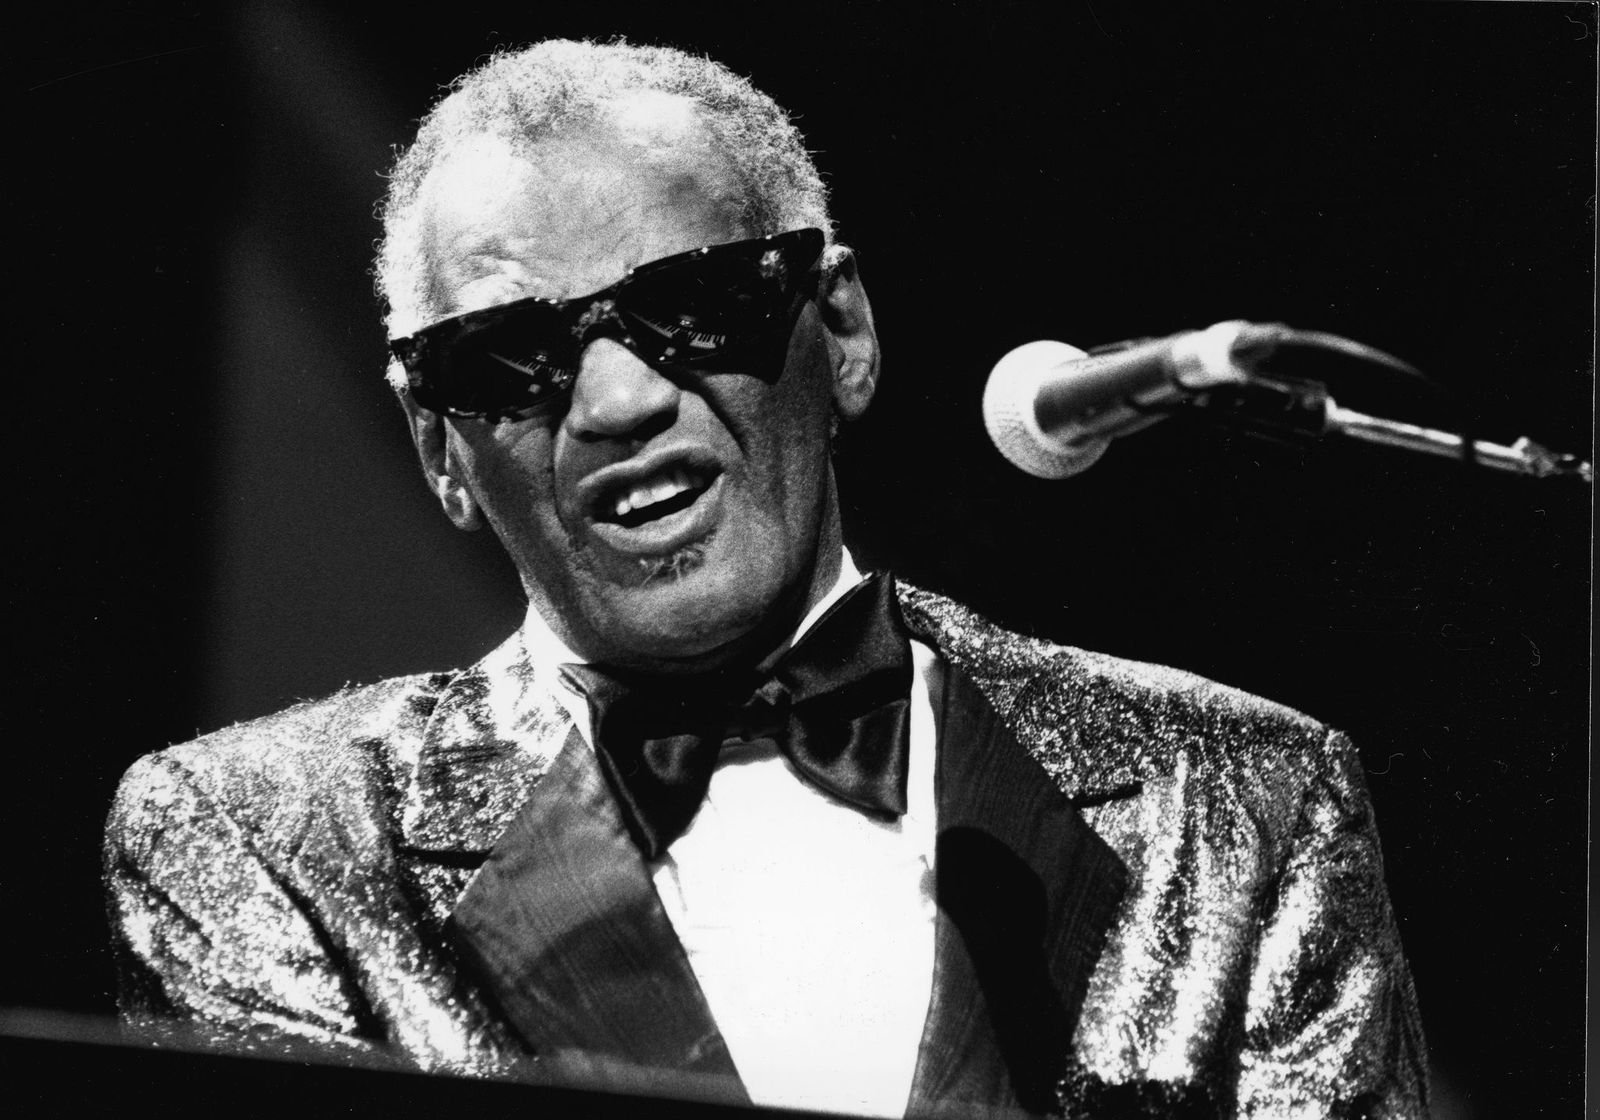 Ray Charles performs in concert in the 1980s | Photo: Hulton Archive/Getty Images